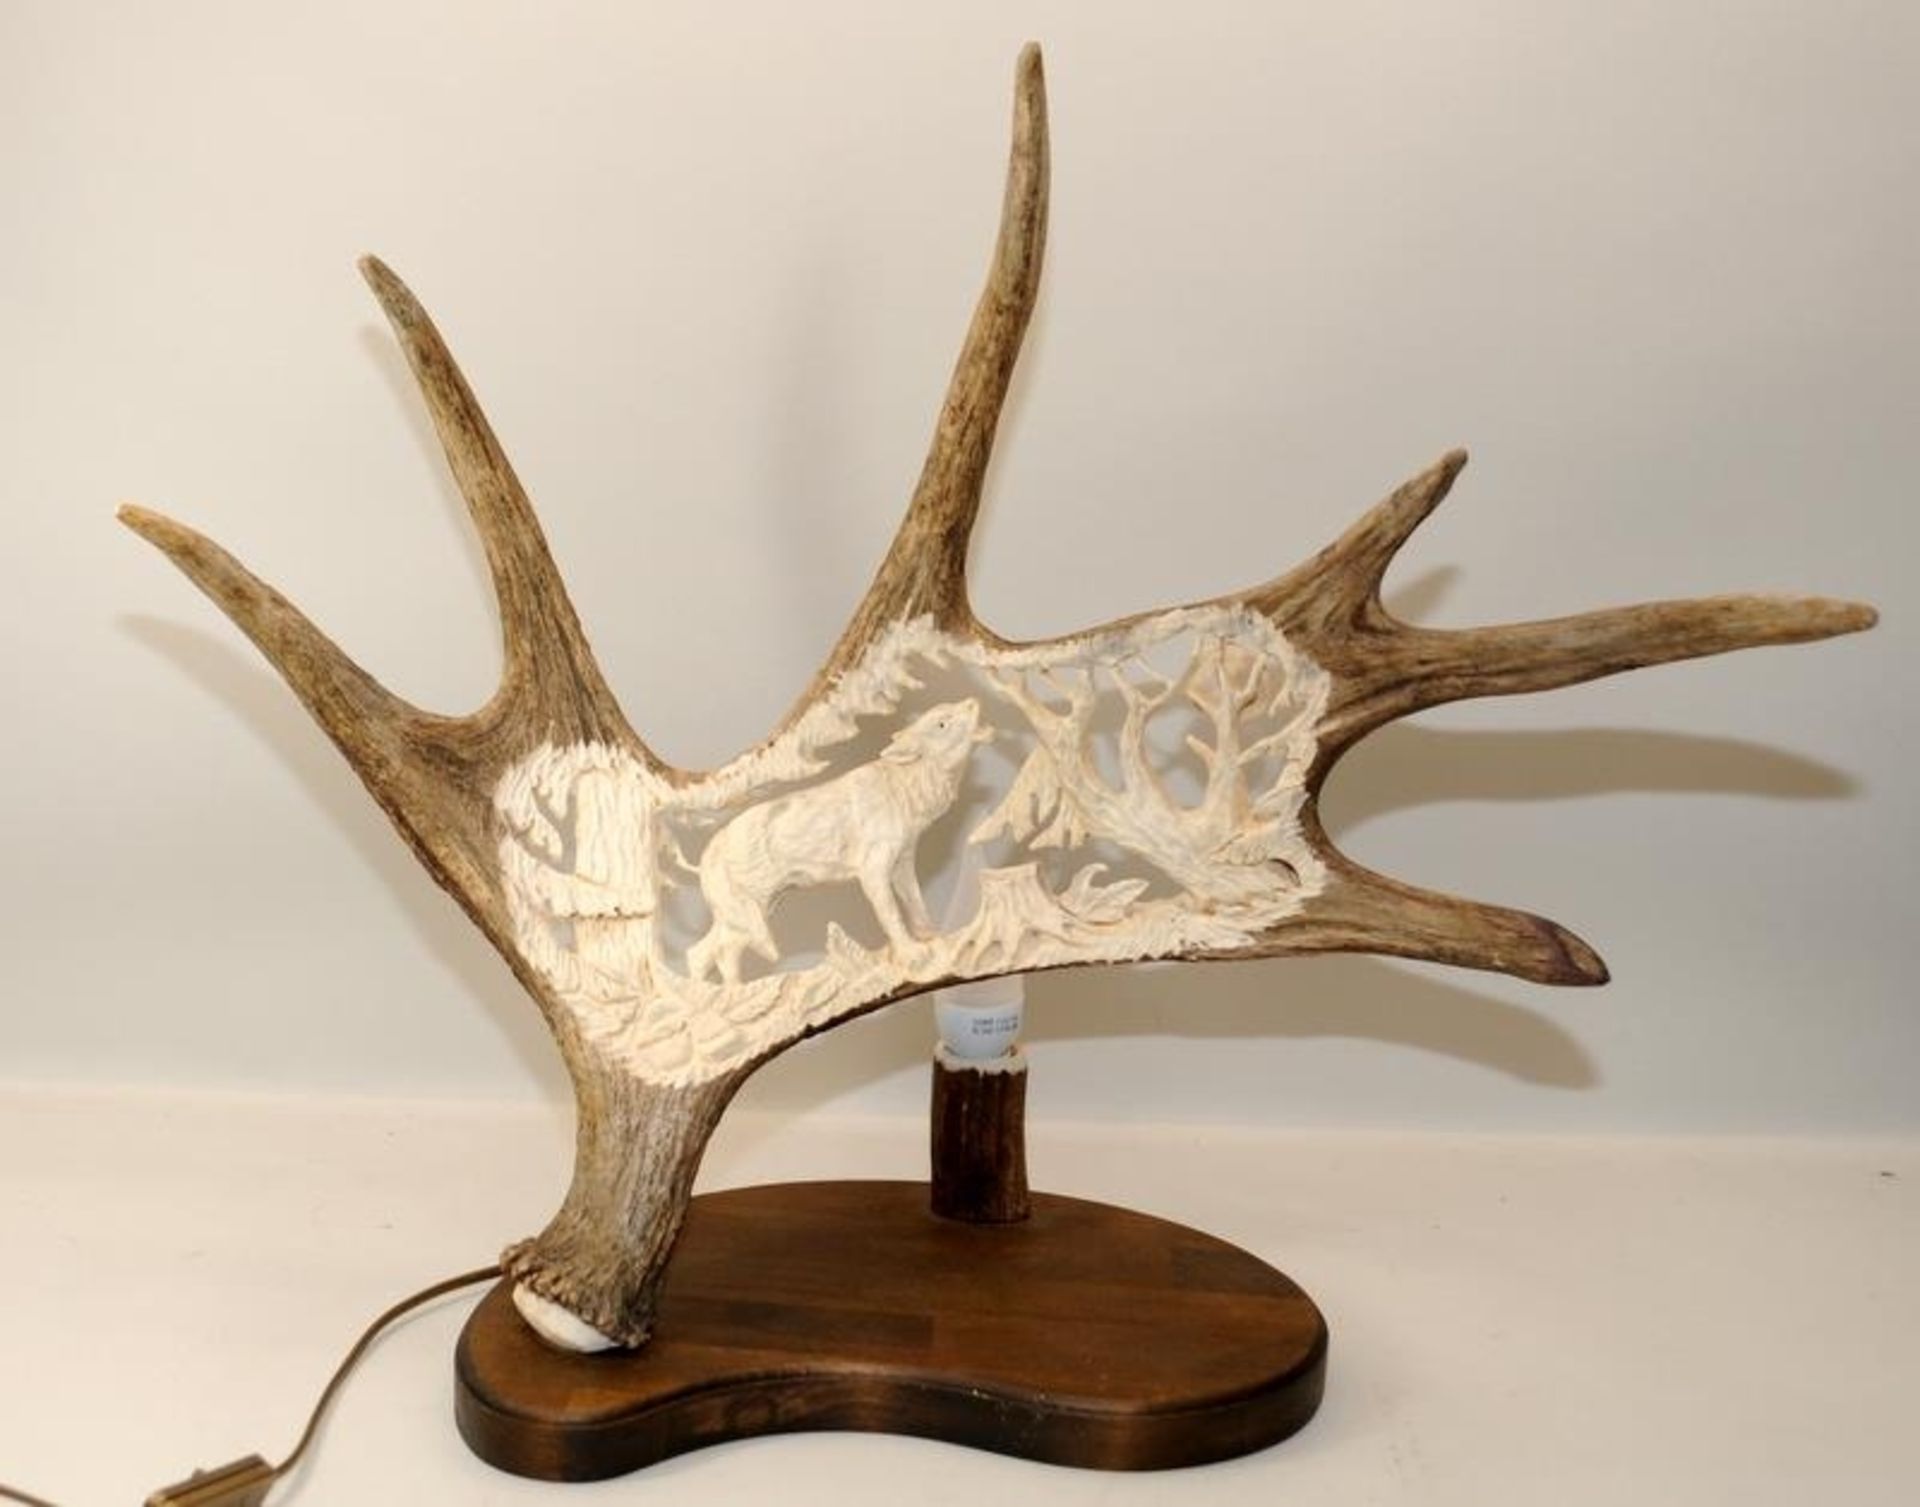 Large antler horn with incised carving depicting a howling wolf. Mounted on a wooden base and